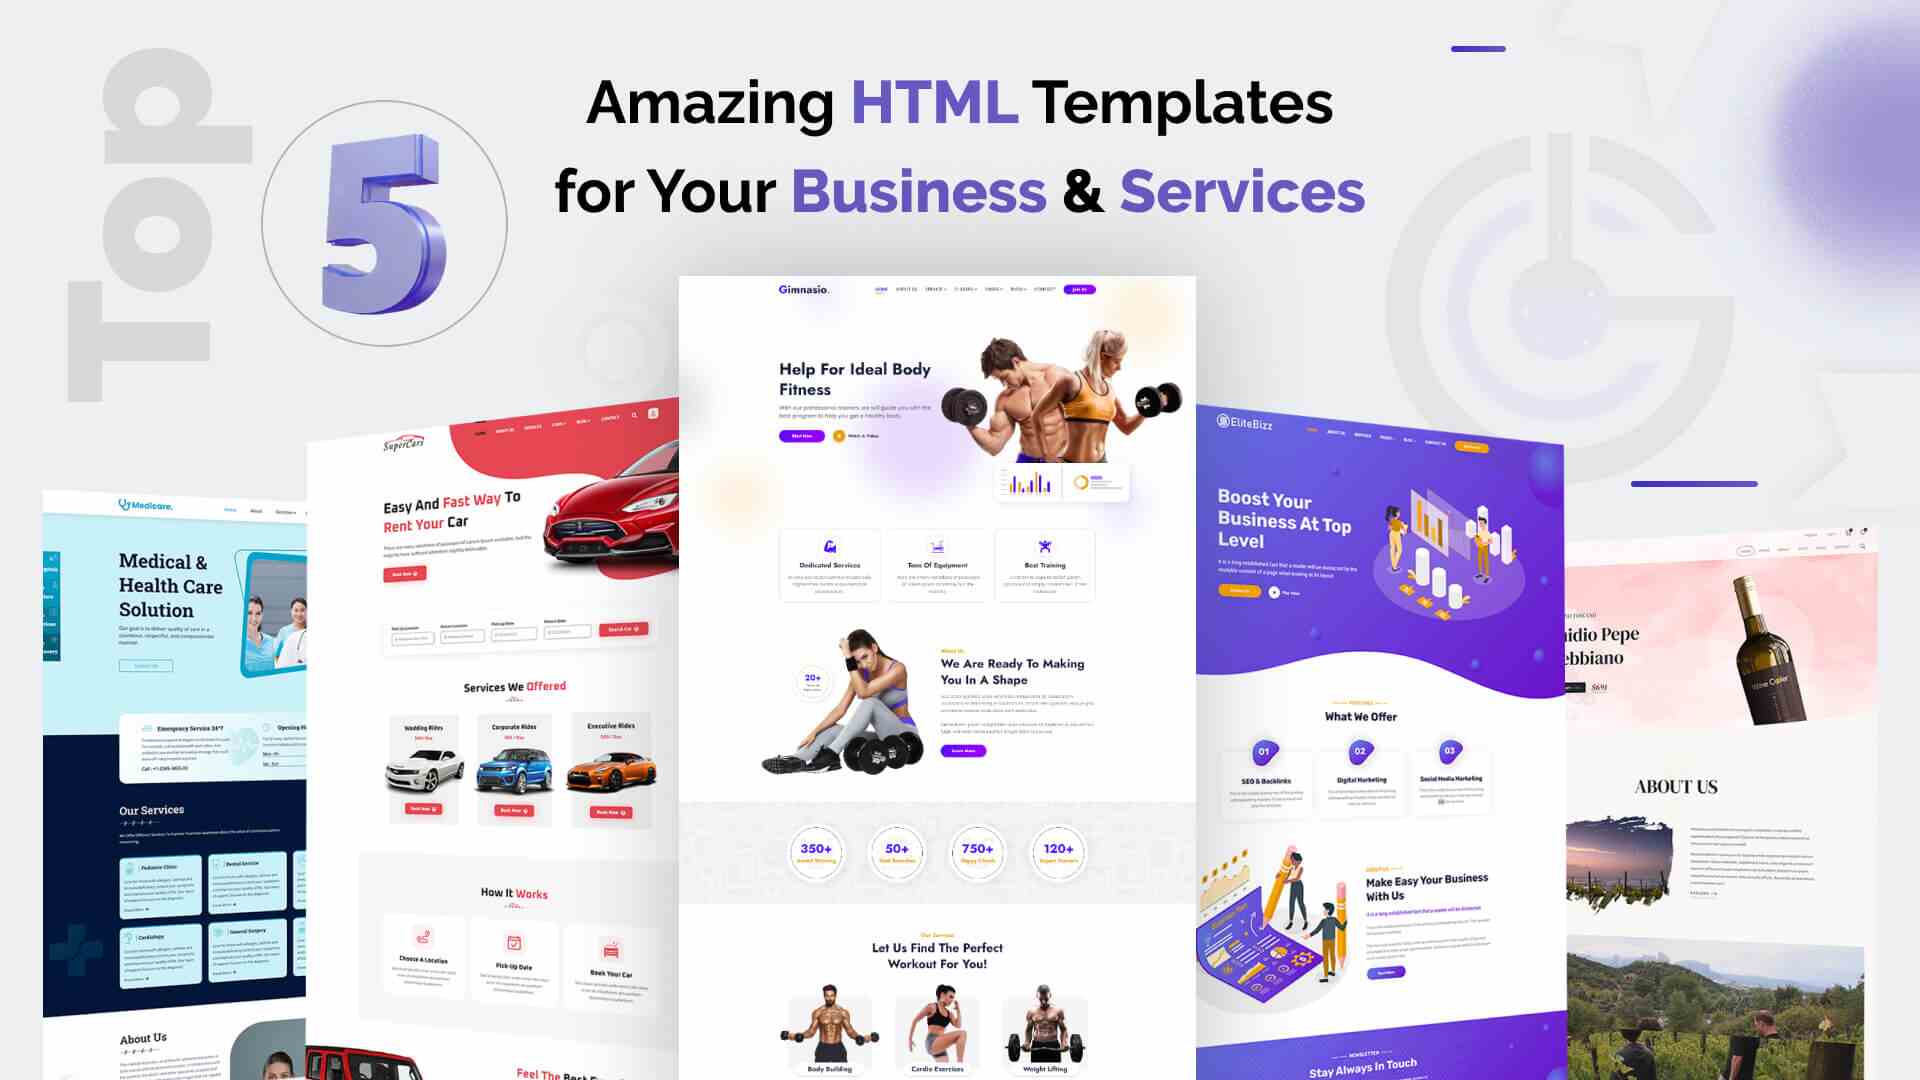 Top 5 Amazing HTML Templates for Your Business and Services